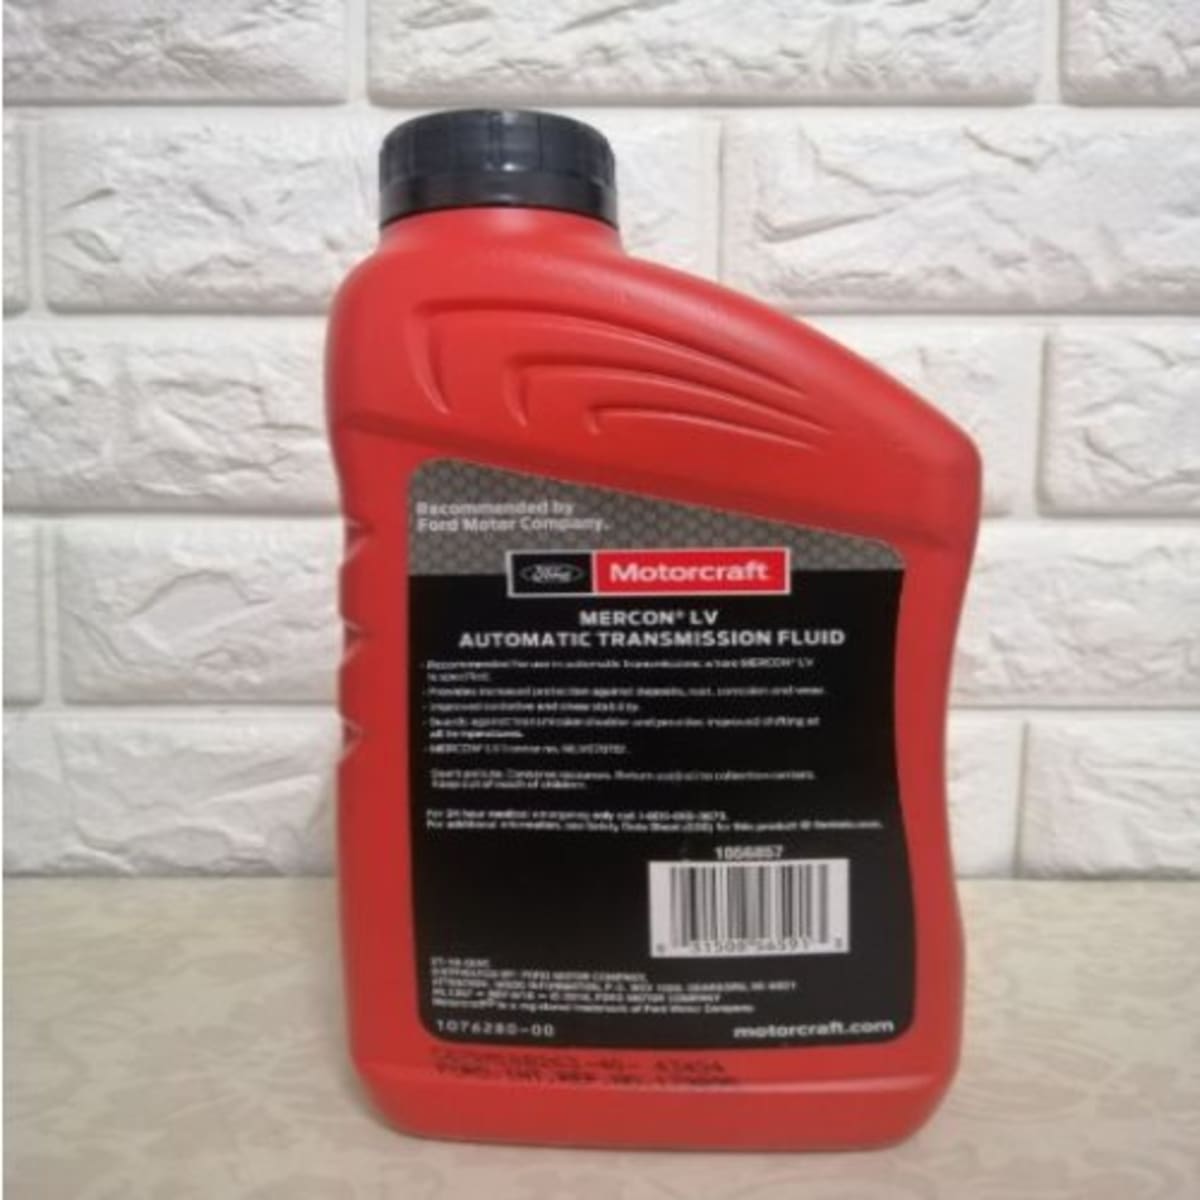 Motorcraft MERCON LV Automatic Transmission Fluid Review 